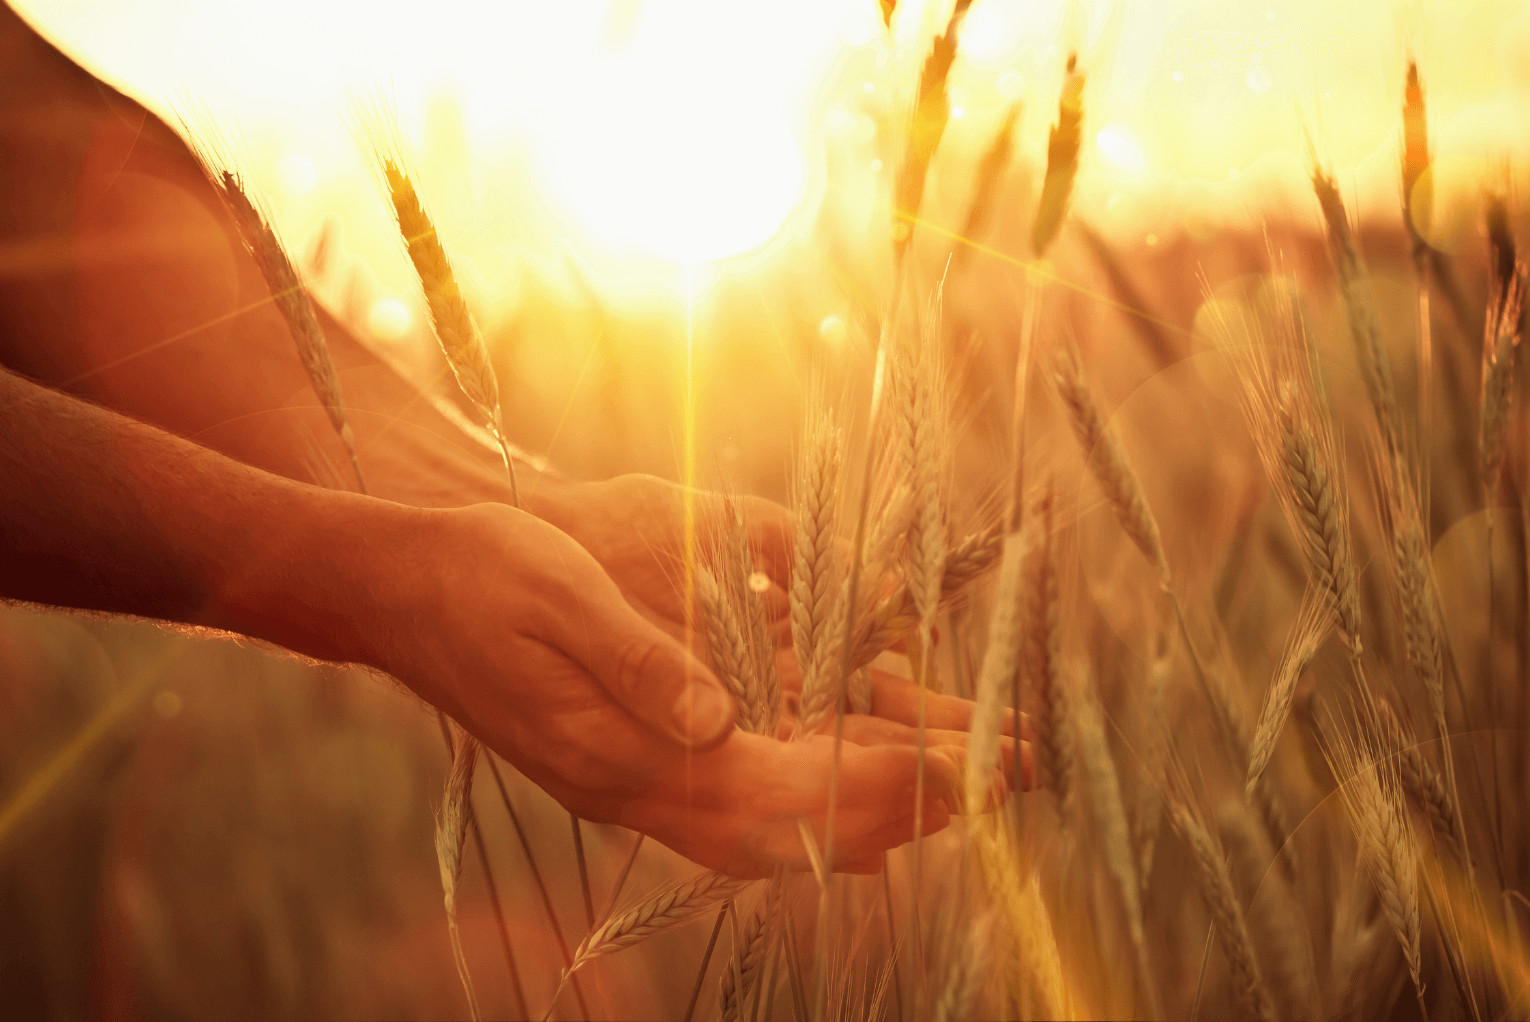 Are We in a Seven Year Window of Divine Harvest?